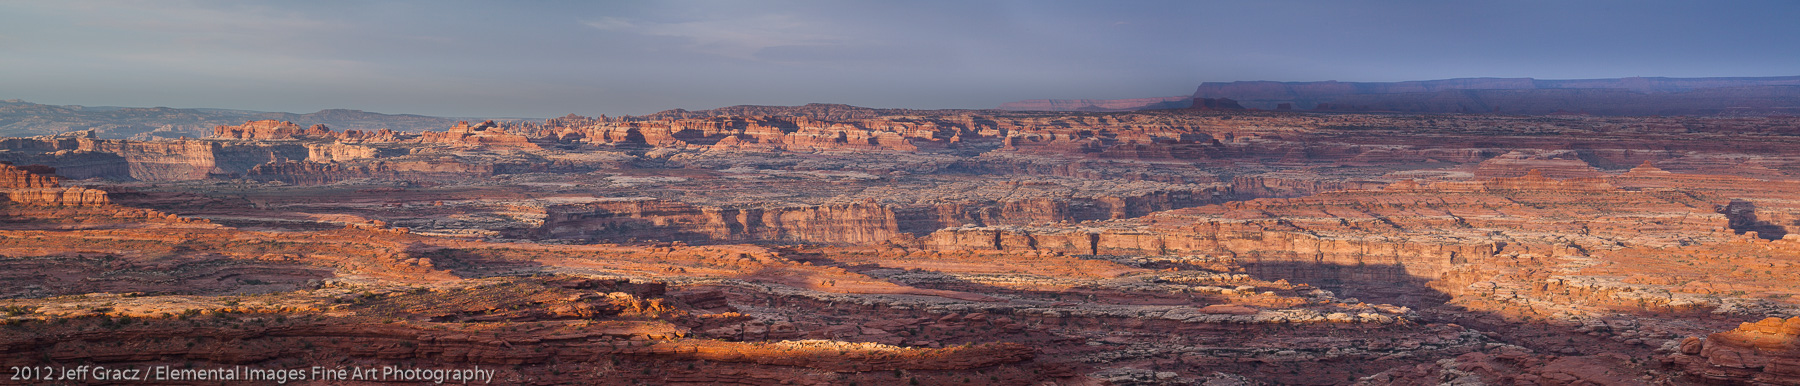 View from the White Crack | Canyonlands National Park | UT | USA - © 2012 Jeff Gracz / Elemental Images Fine Art Photography - All Rights Reserved Worldwide